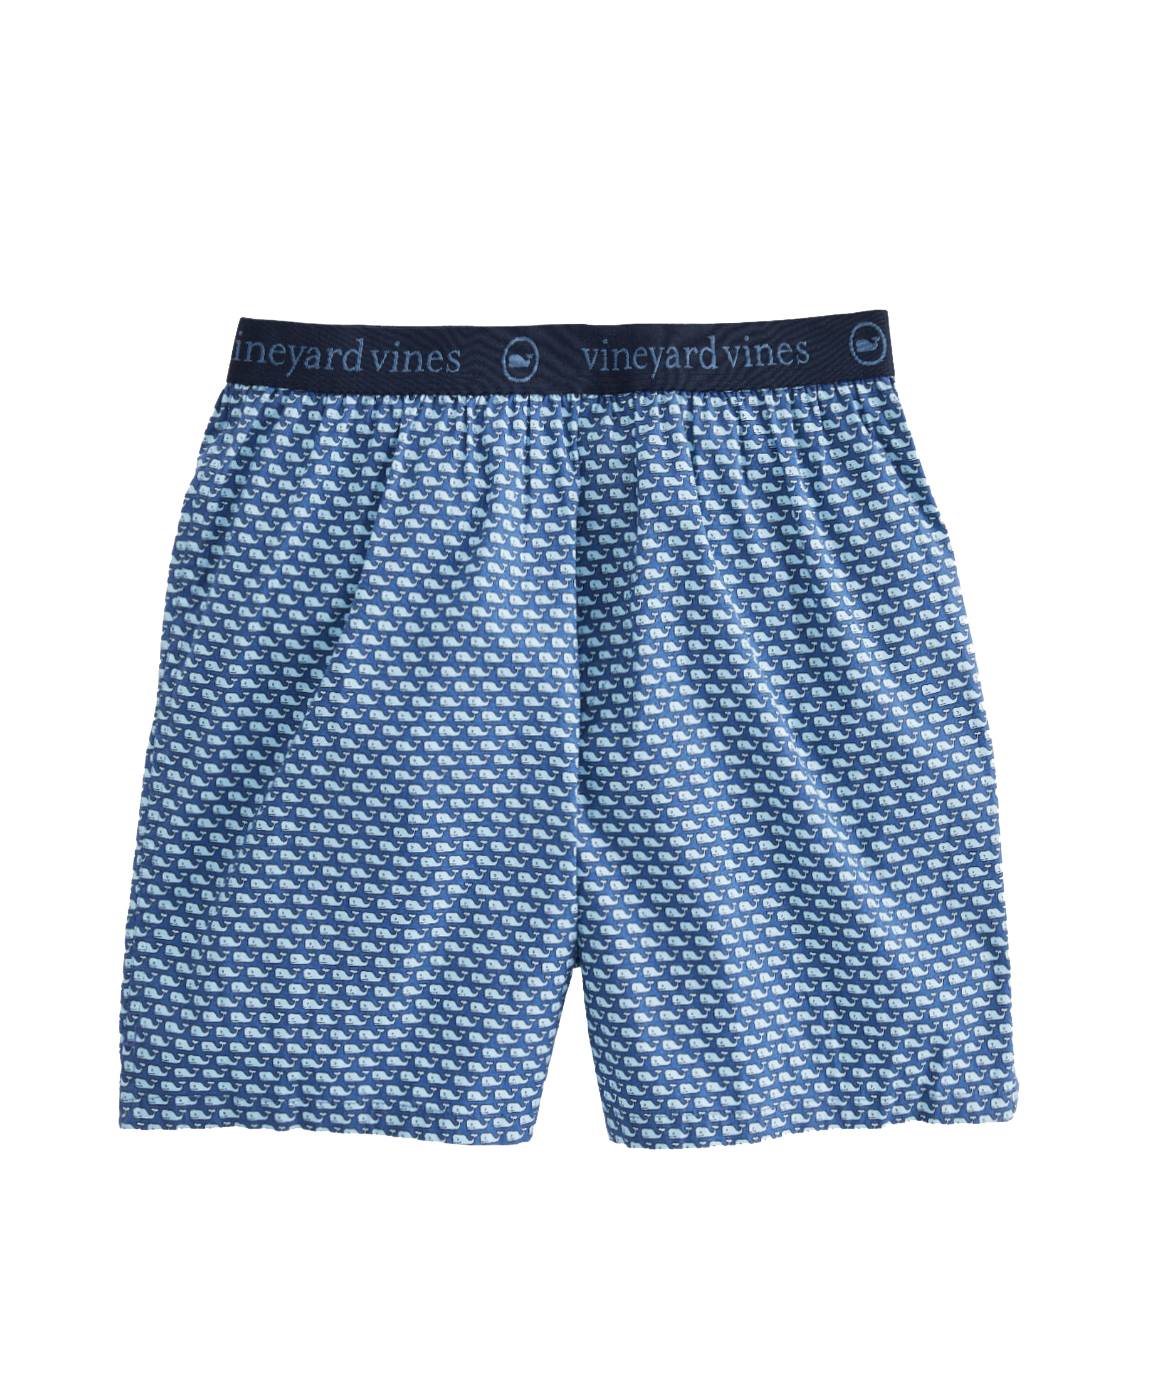 Whale Printed Boxers Moonshine